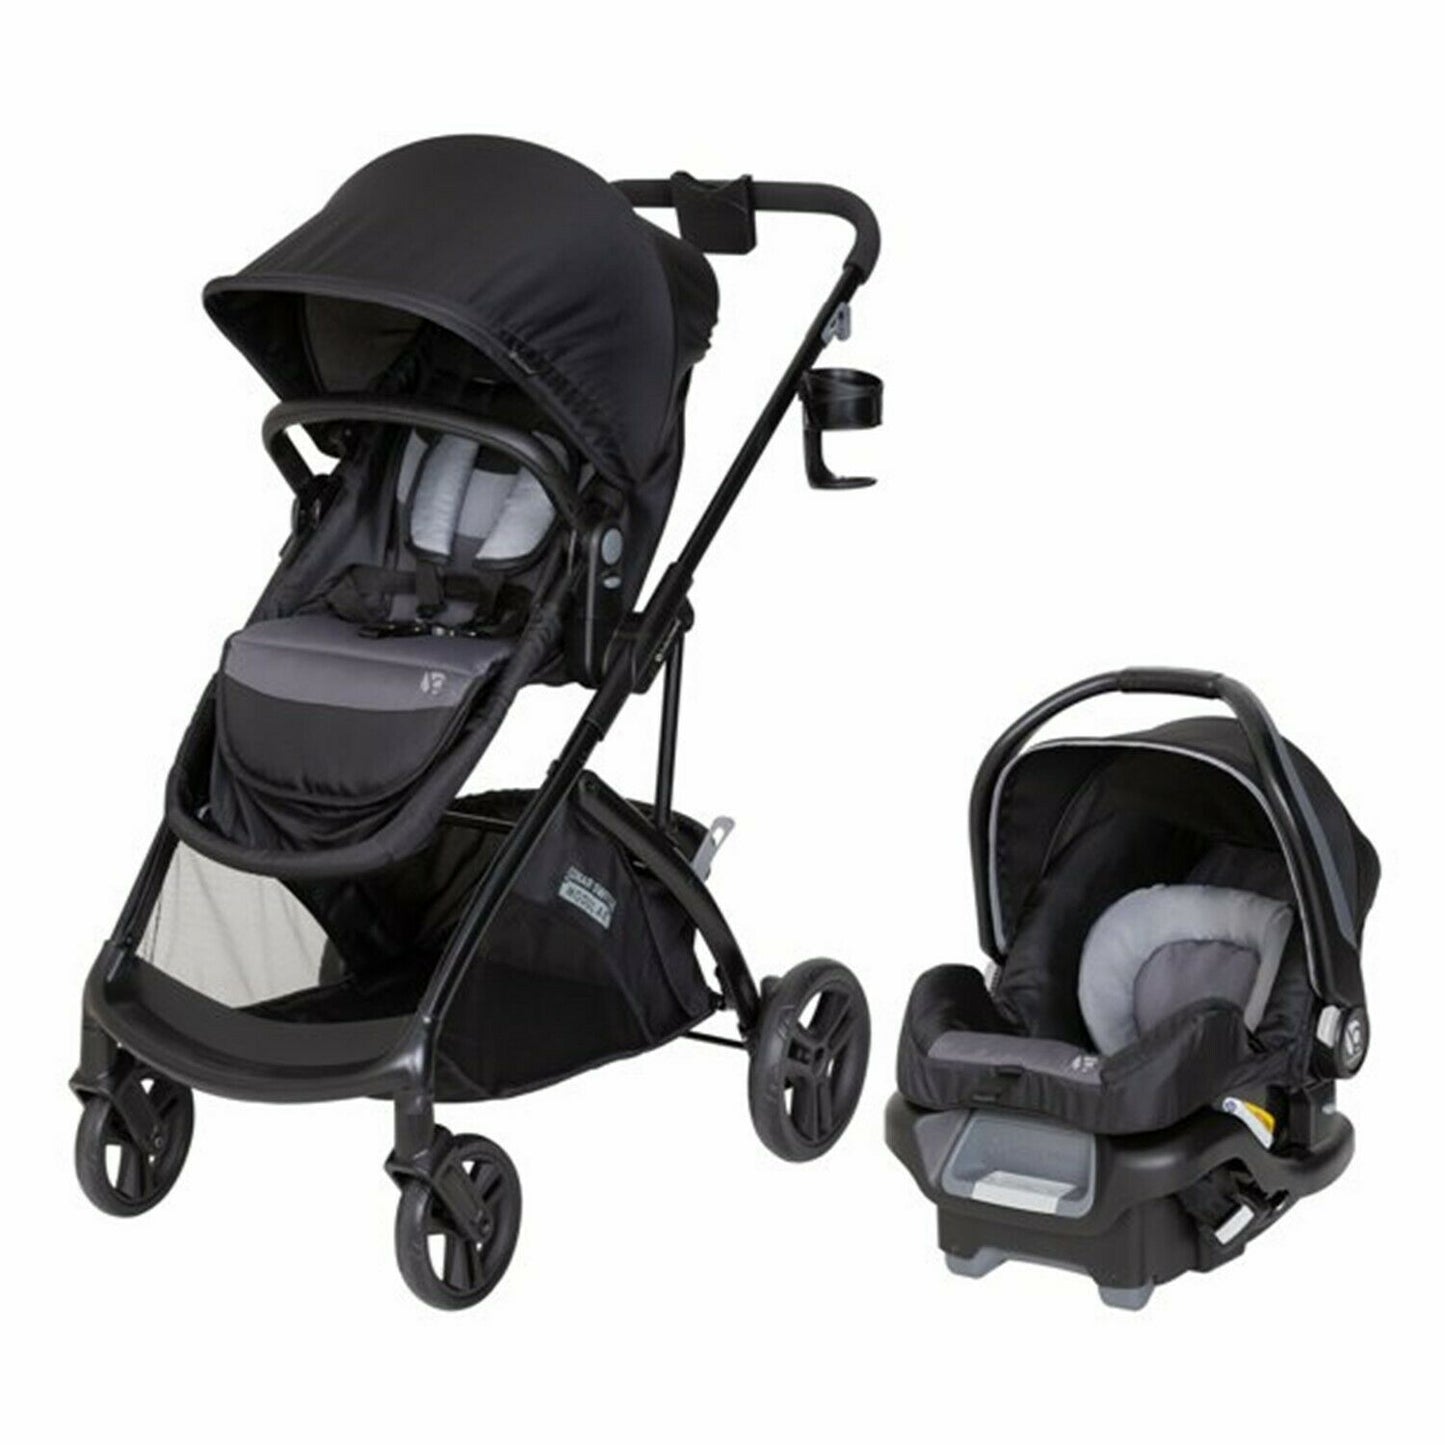 Baby Trend Stroller 6-in-1 Travel System with Car Seat Infant Playard Nursery